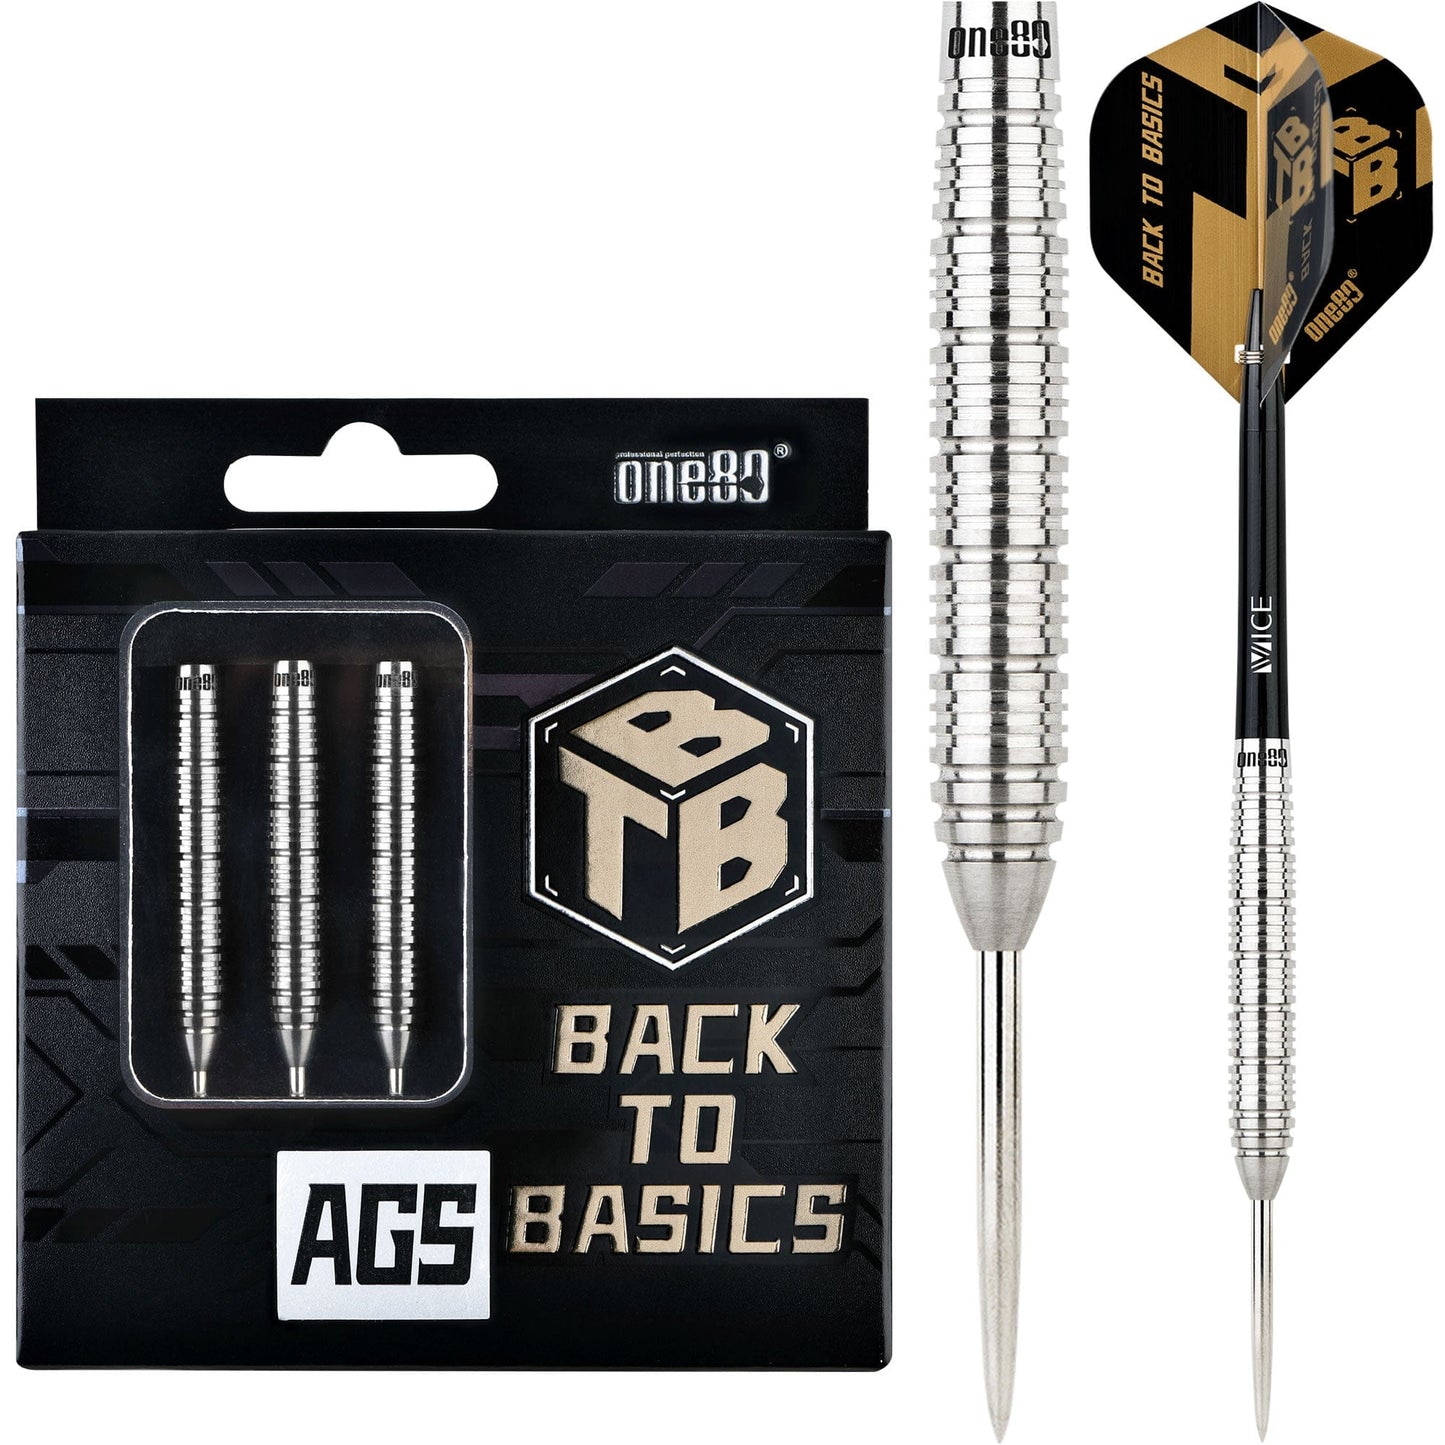 One80 Back To Basic Darts - Steel Tip - AGS - Natural - Ringed 23g